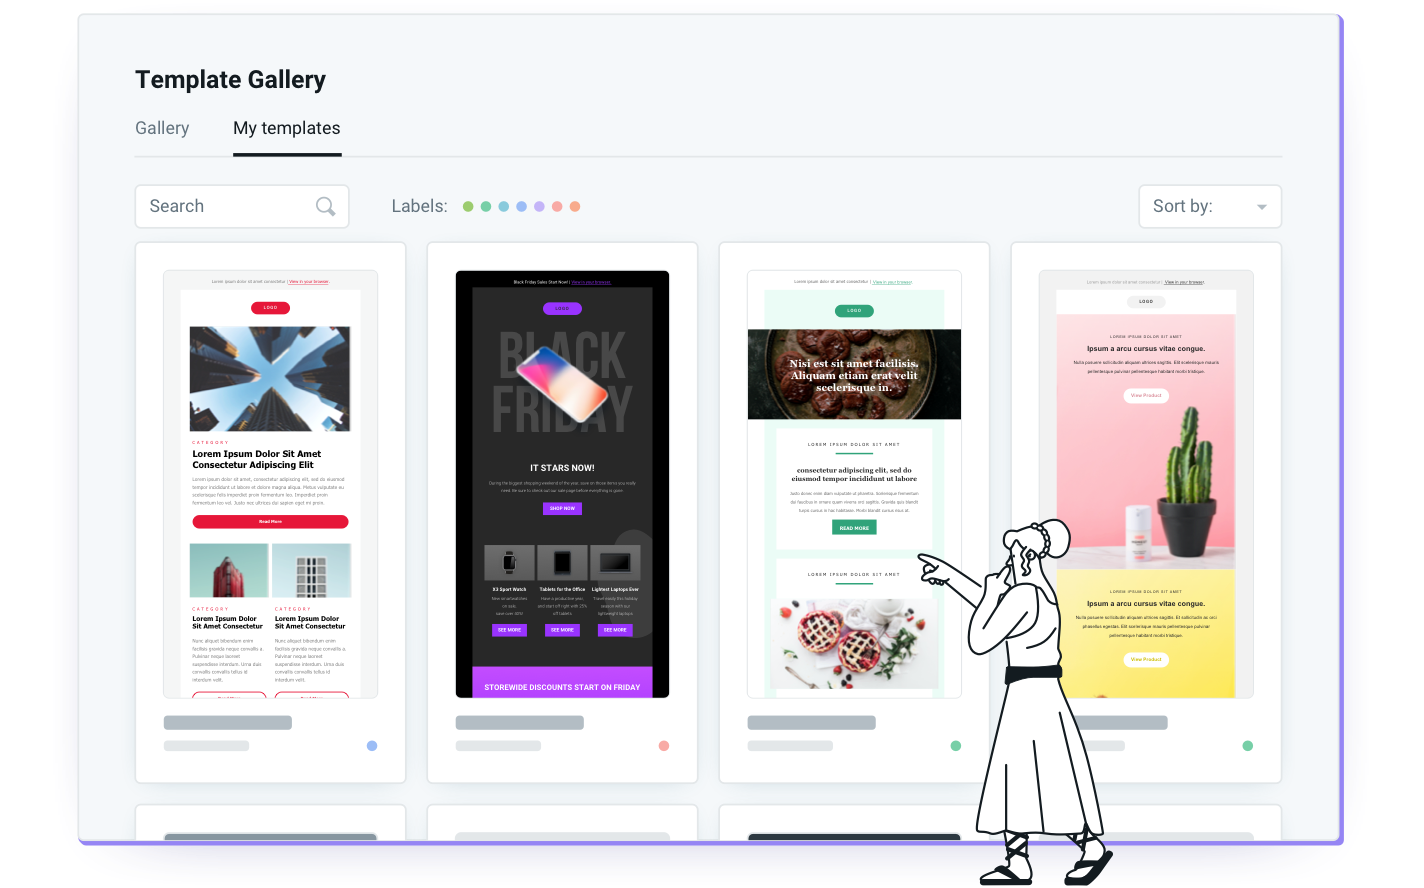 Mailjet’s Template Gallery